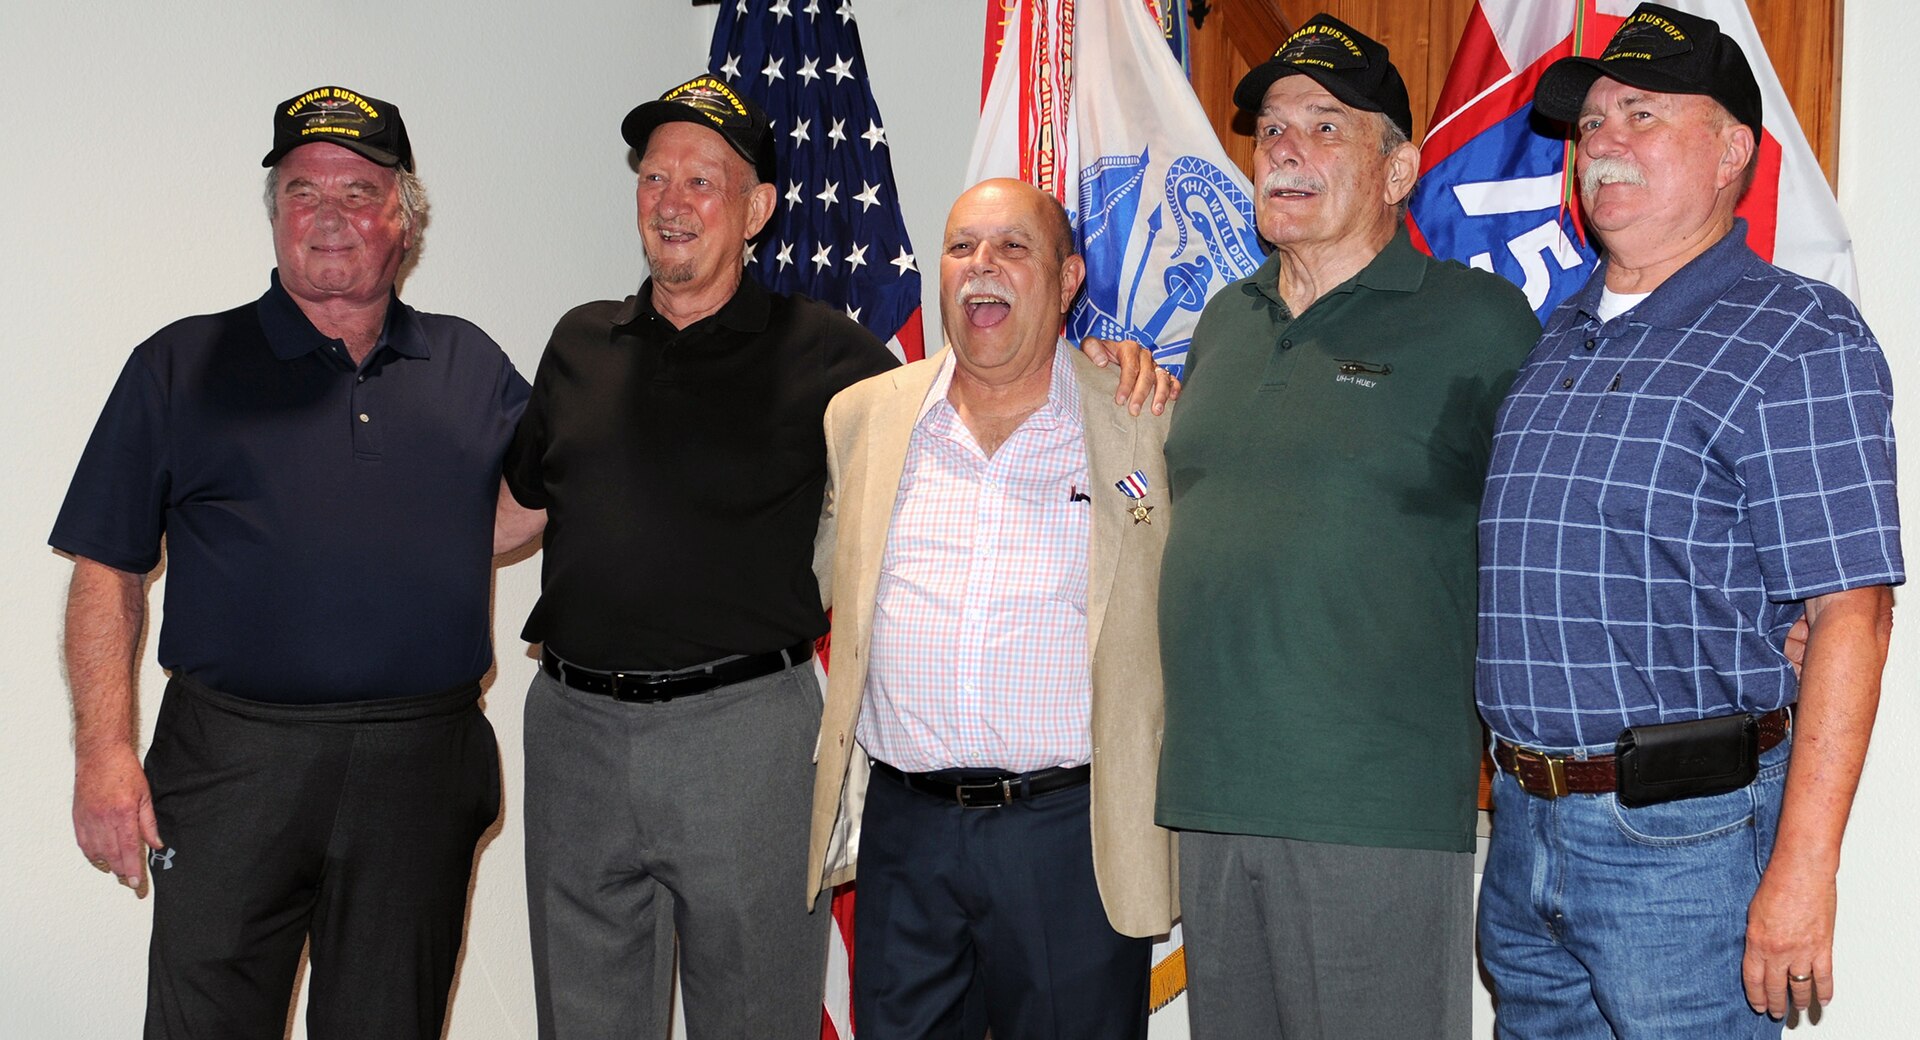 Edward Iannuccilli, center, stands with members of his unit, the 159th Medical Evacuation Company, or Dustoff, following an award ceremony where he received the Silver Star. Iannuccilli, a combat medic in Vietnam, disregarded his own safety to rescue a pilot trapped inside a burning medical evacuation helicopter, while the enemy fired on him and ammunition inside the aircraft exploded. Then-Spec. 4 Iannuccilli rescued Ted Howard (second from left) April 7, 1970. From left to right are are Jim Dixon, Howard, Iannuccilli, Bruce Nelson and Randy Millican. 